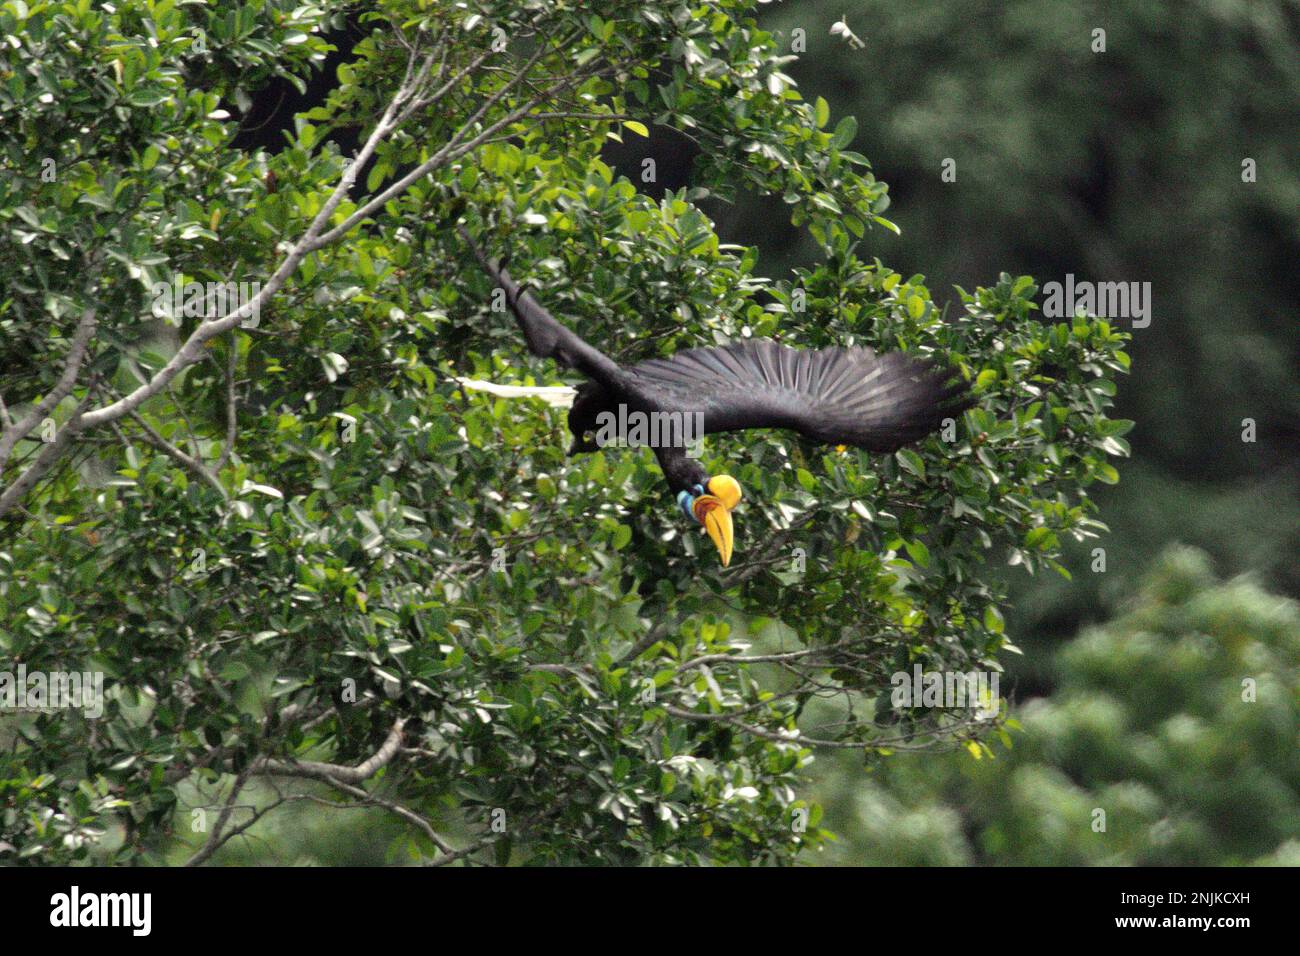 A female individual of knobbed hornbill, or sometimes called Sulawesi wrinkled hornbill (Rhyticeros cassidix), flies as she is leaving a tree during a foraging session in a rainforest area near Mount Tangkoko and Duasudara in Bitung, North Sulawesi, Indonesia. Due to their dependency on forest and certain types of trees, hornbills in general are threatened by climate change. Stock Photo